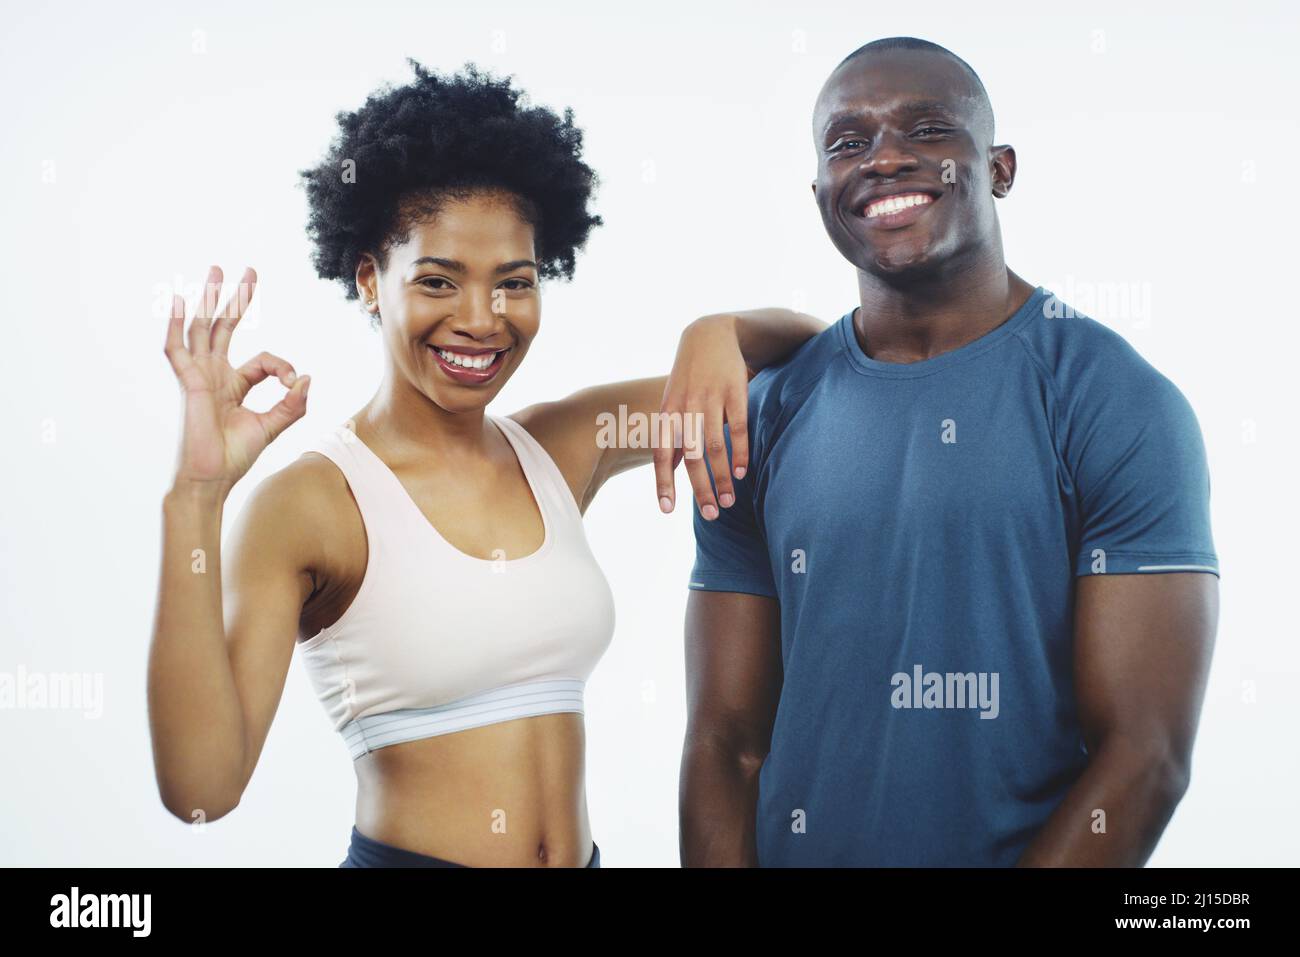 We offer top of the range fitness services. Studio shot of two young athletes posing together against a grey background. Stock Photo